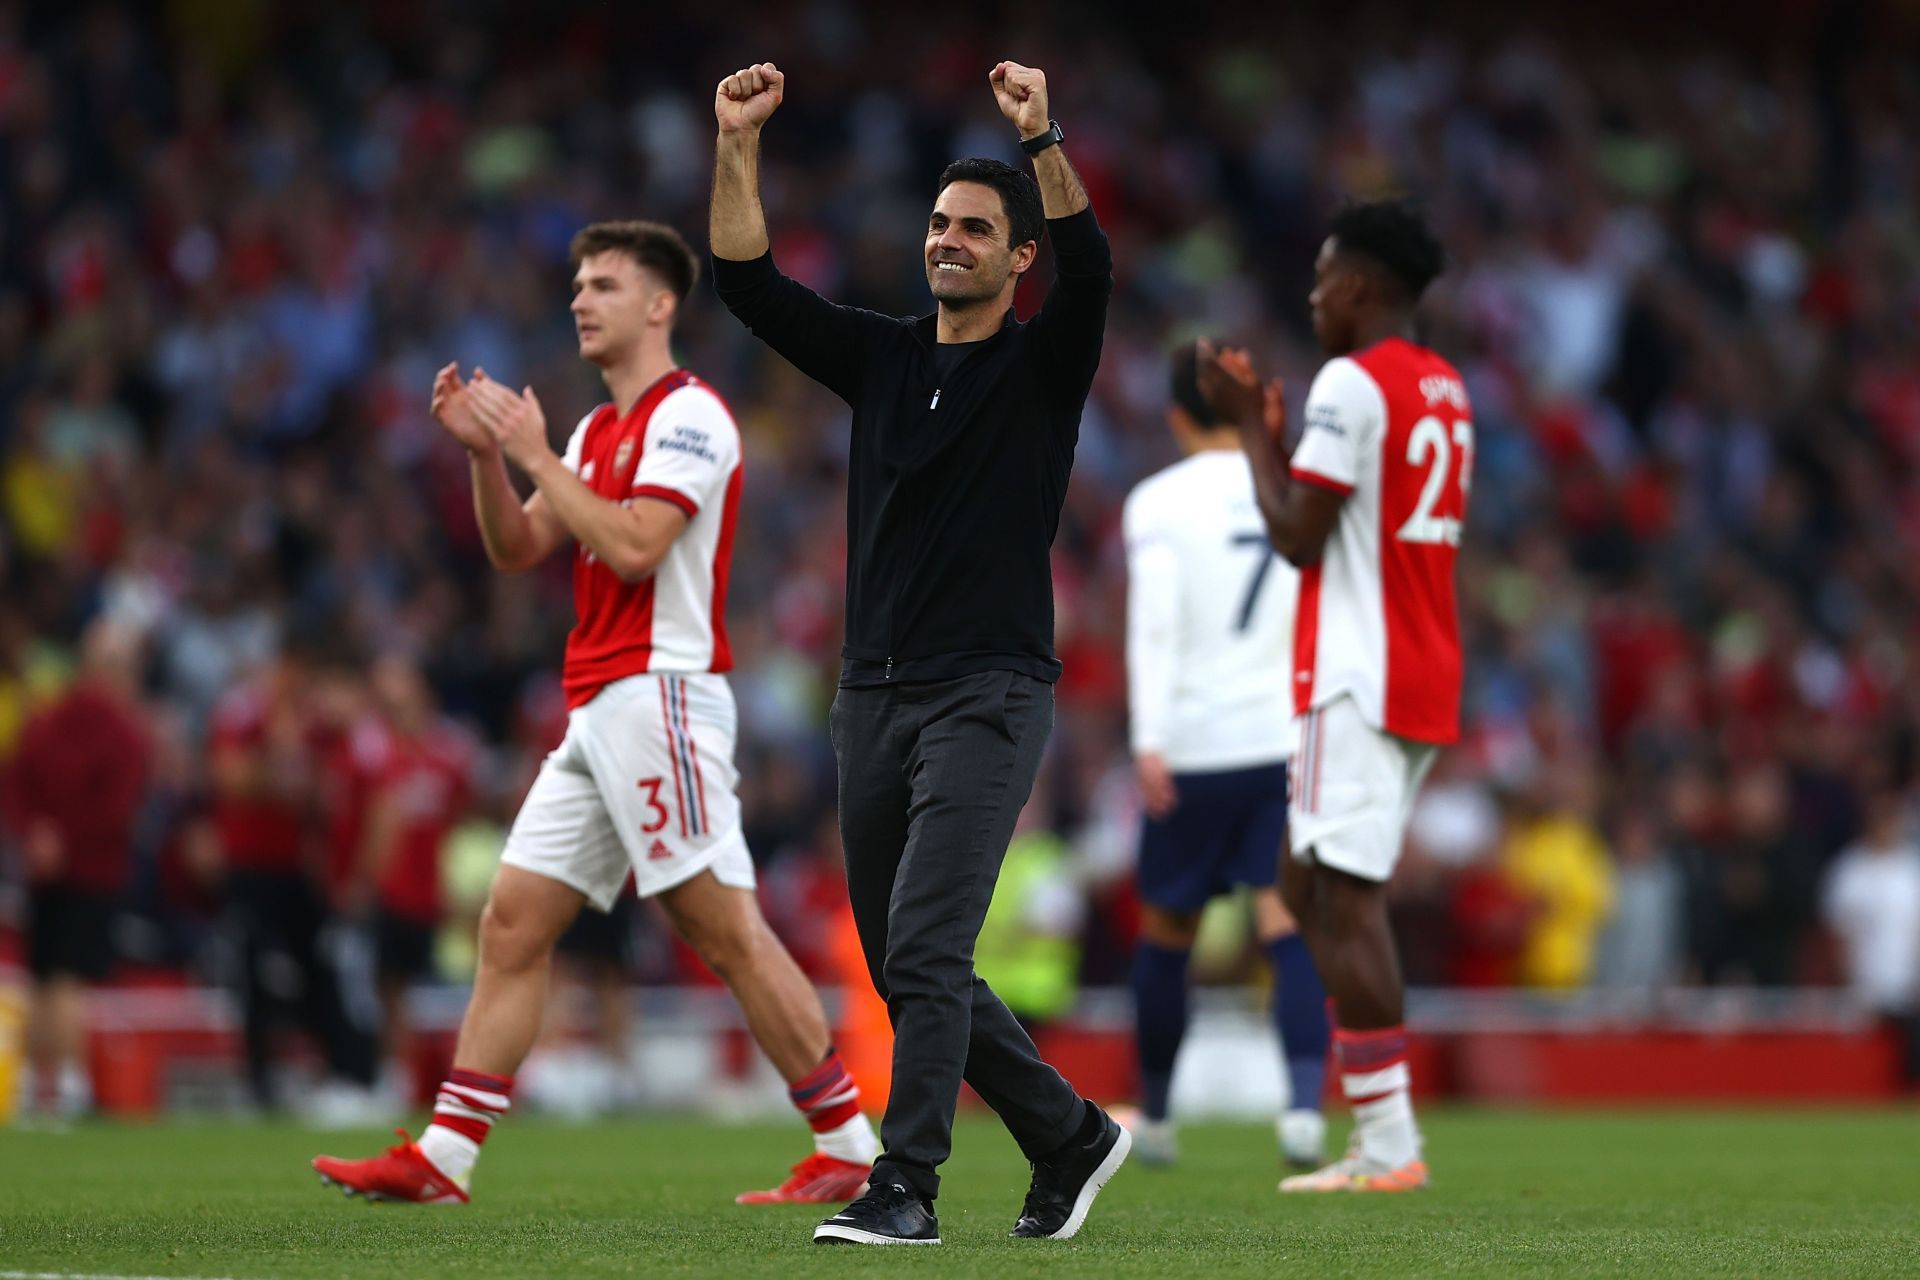 Arsenal have been on the ascendancy in recent weeks